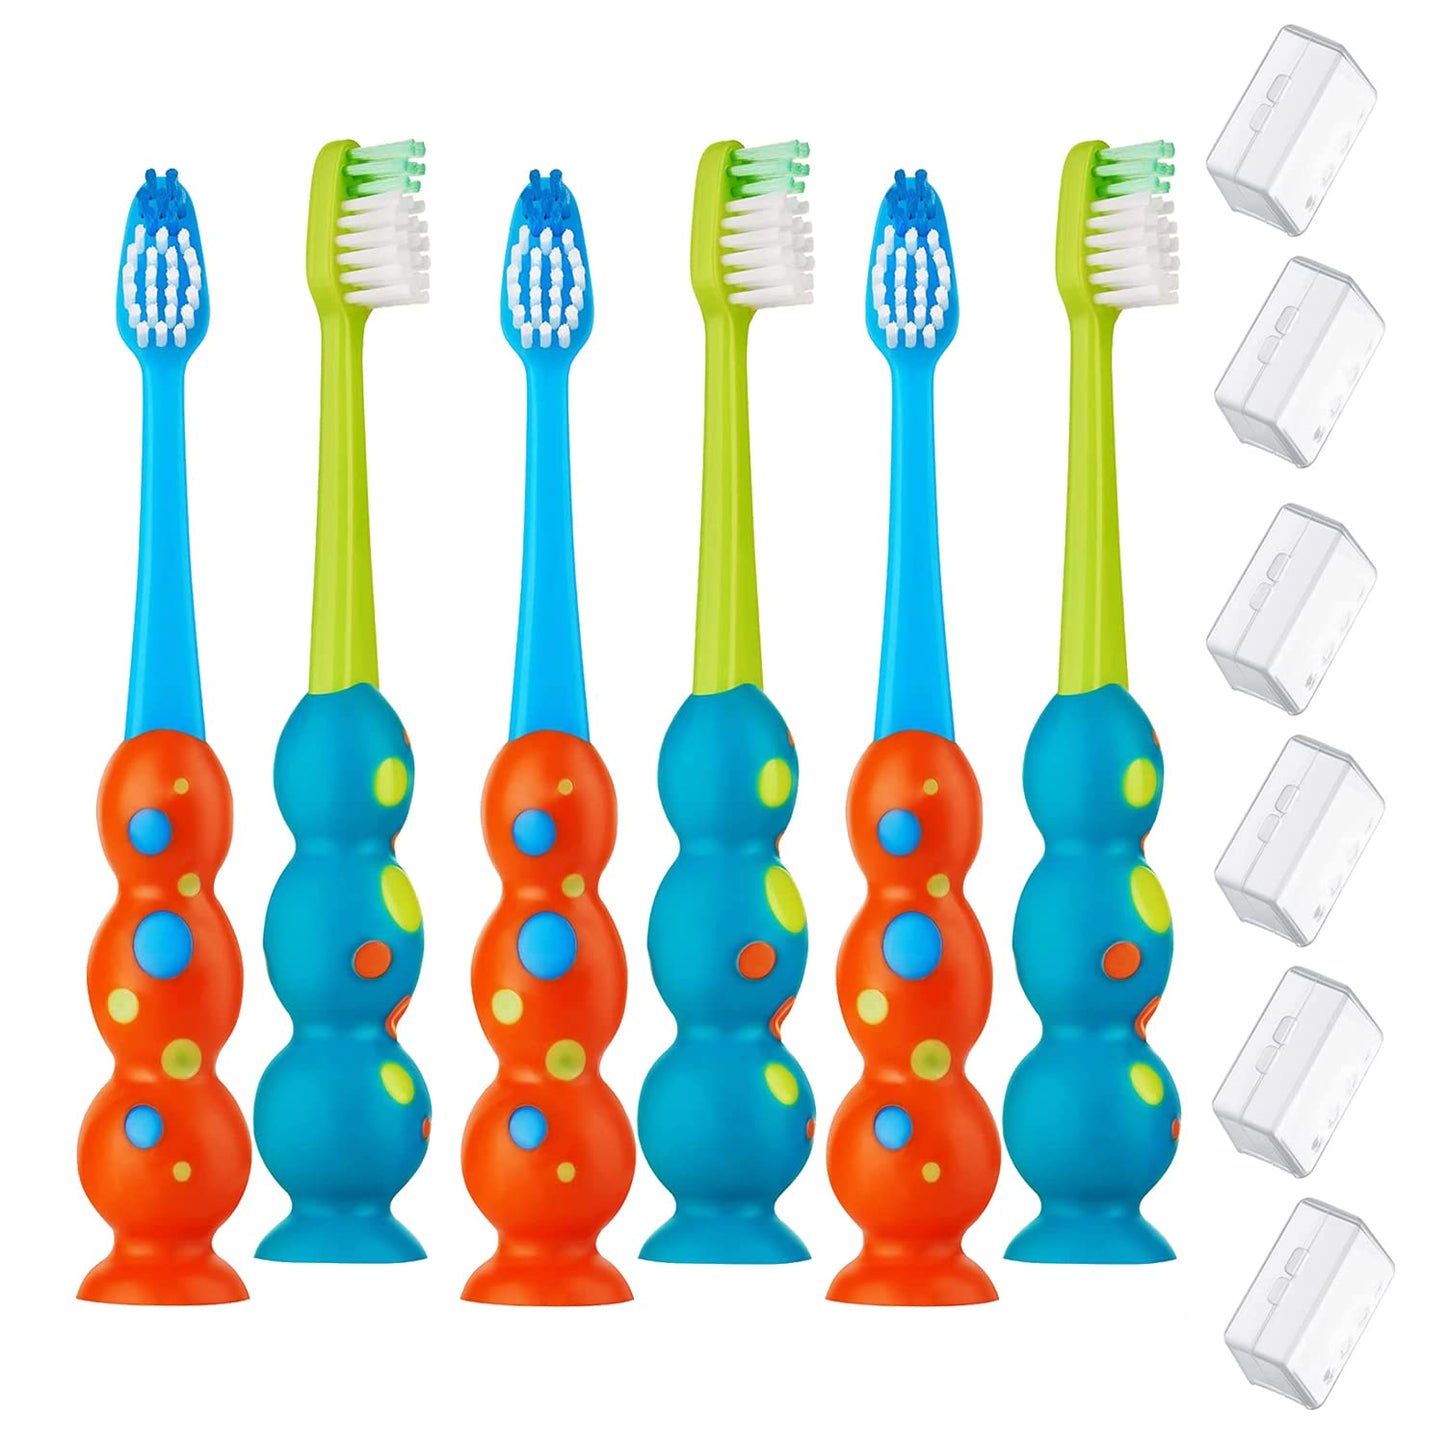 Trueocity Kids Toothbrush 2 Pack - Soft Contoured Bristles - Child Sized Brush Heads (3-10 Year Old) - Suction Cup for Fun & Easy Storage - Girl & Boy Set (2-Pack, Blue & Orange)